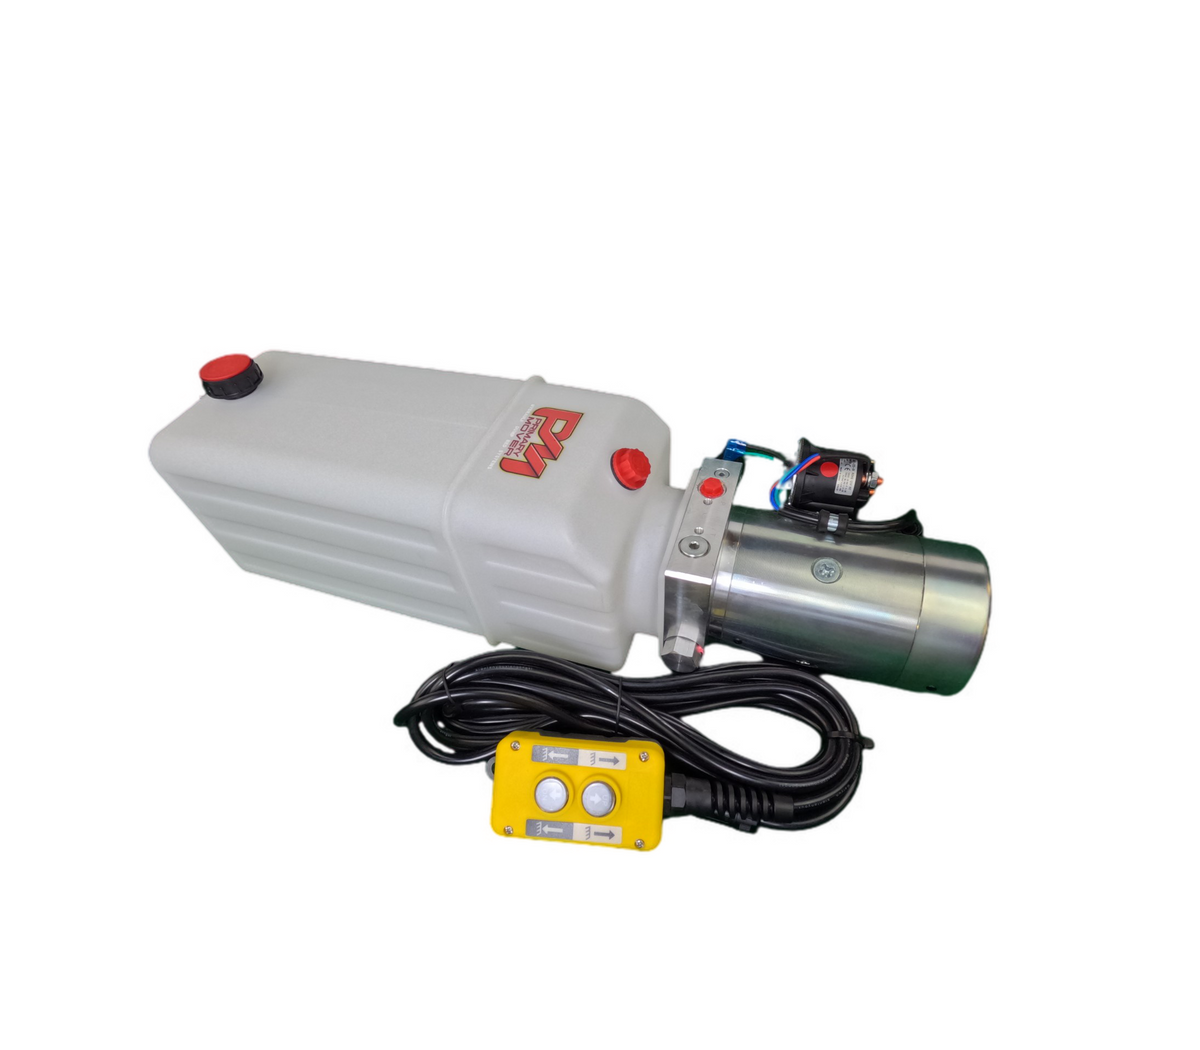 A white plastic cylinder with a red button and black cord, a yellow control panel, and wires. DLH 12V Single-Acting Hydraulic Pump - Poly Reservoir for efficient lifting in various applications.